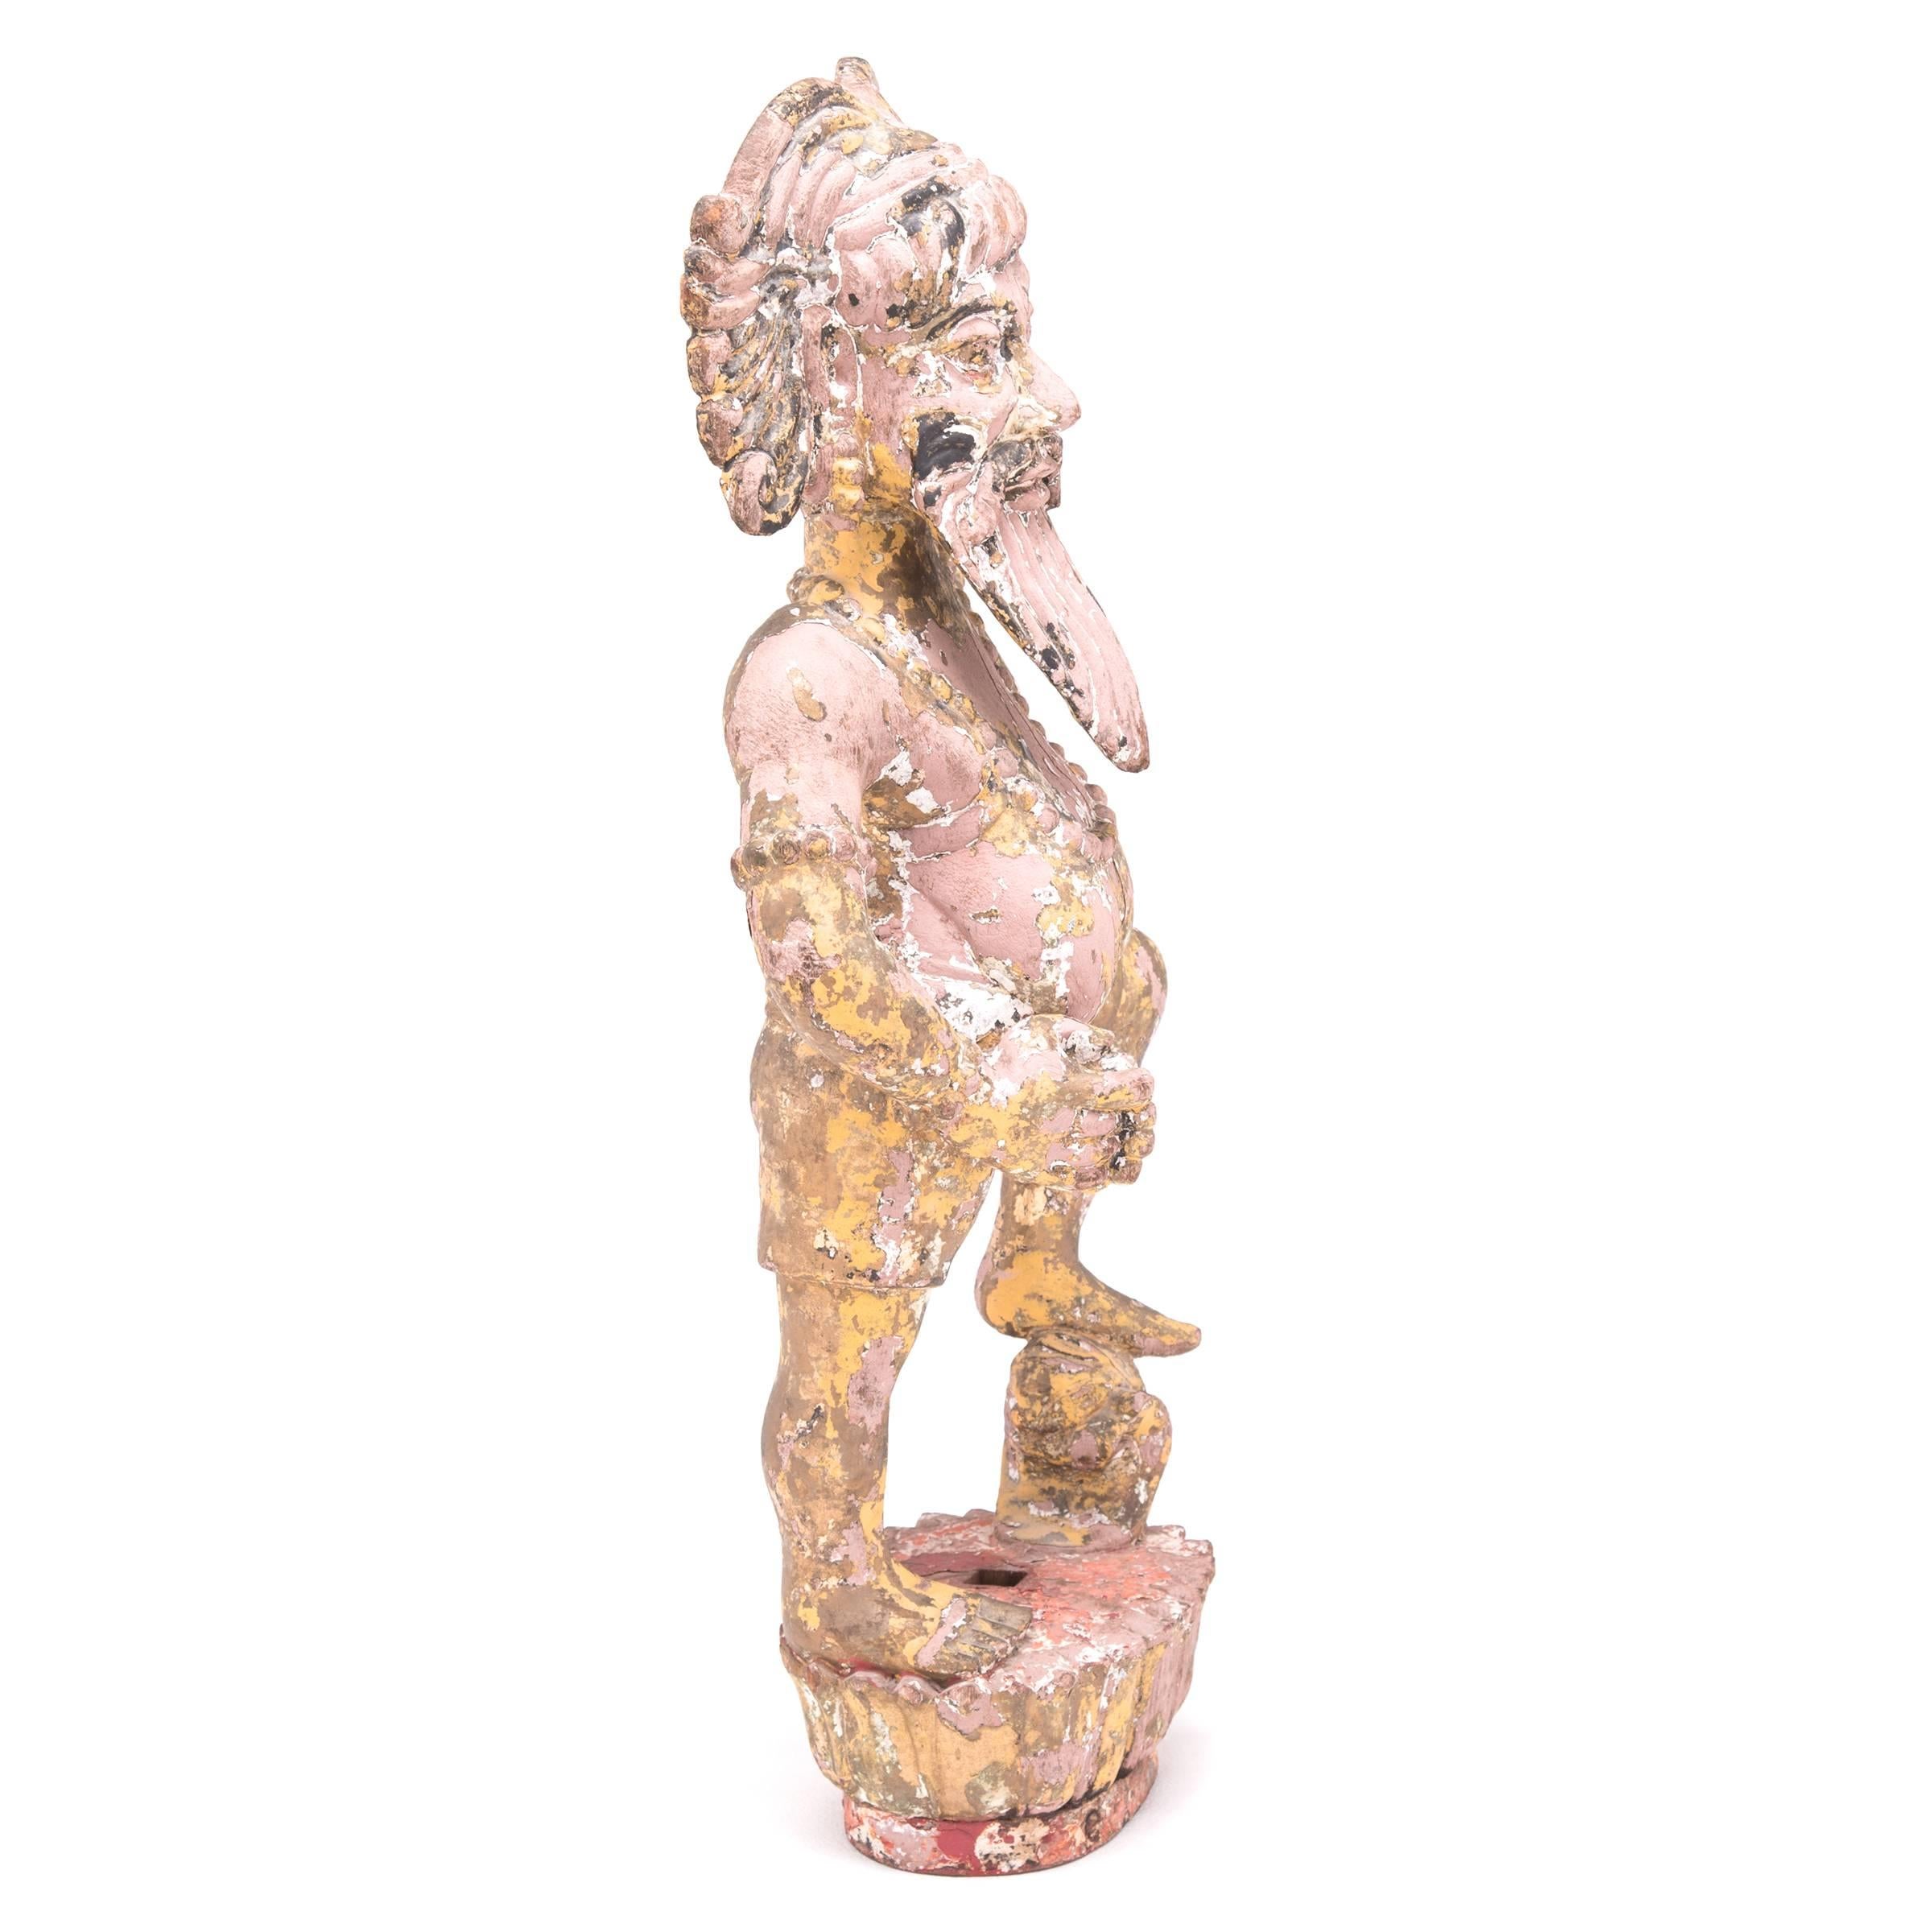 Likely representing a divinity figure, this expressive wooden figure possesses both a sense of whimsy and potent energy. Remnants of pigment suggest that this sculpture was once accented with vivid color, further imbuing the figure with a powerful